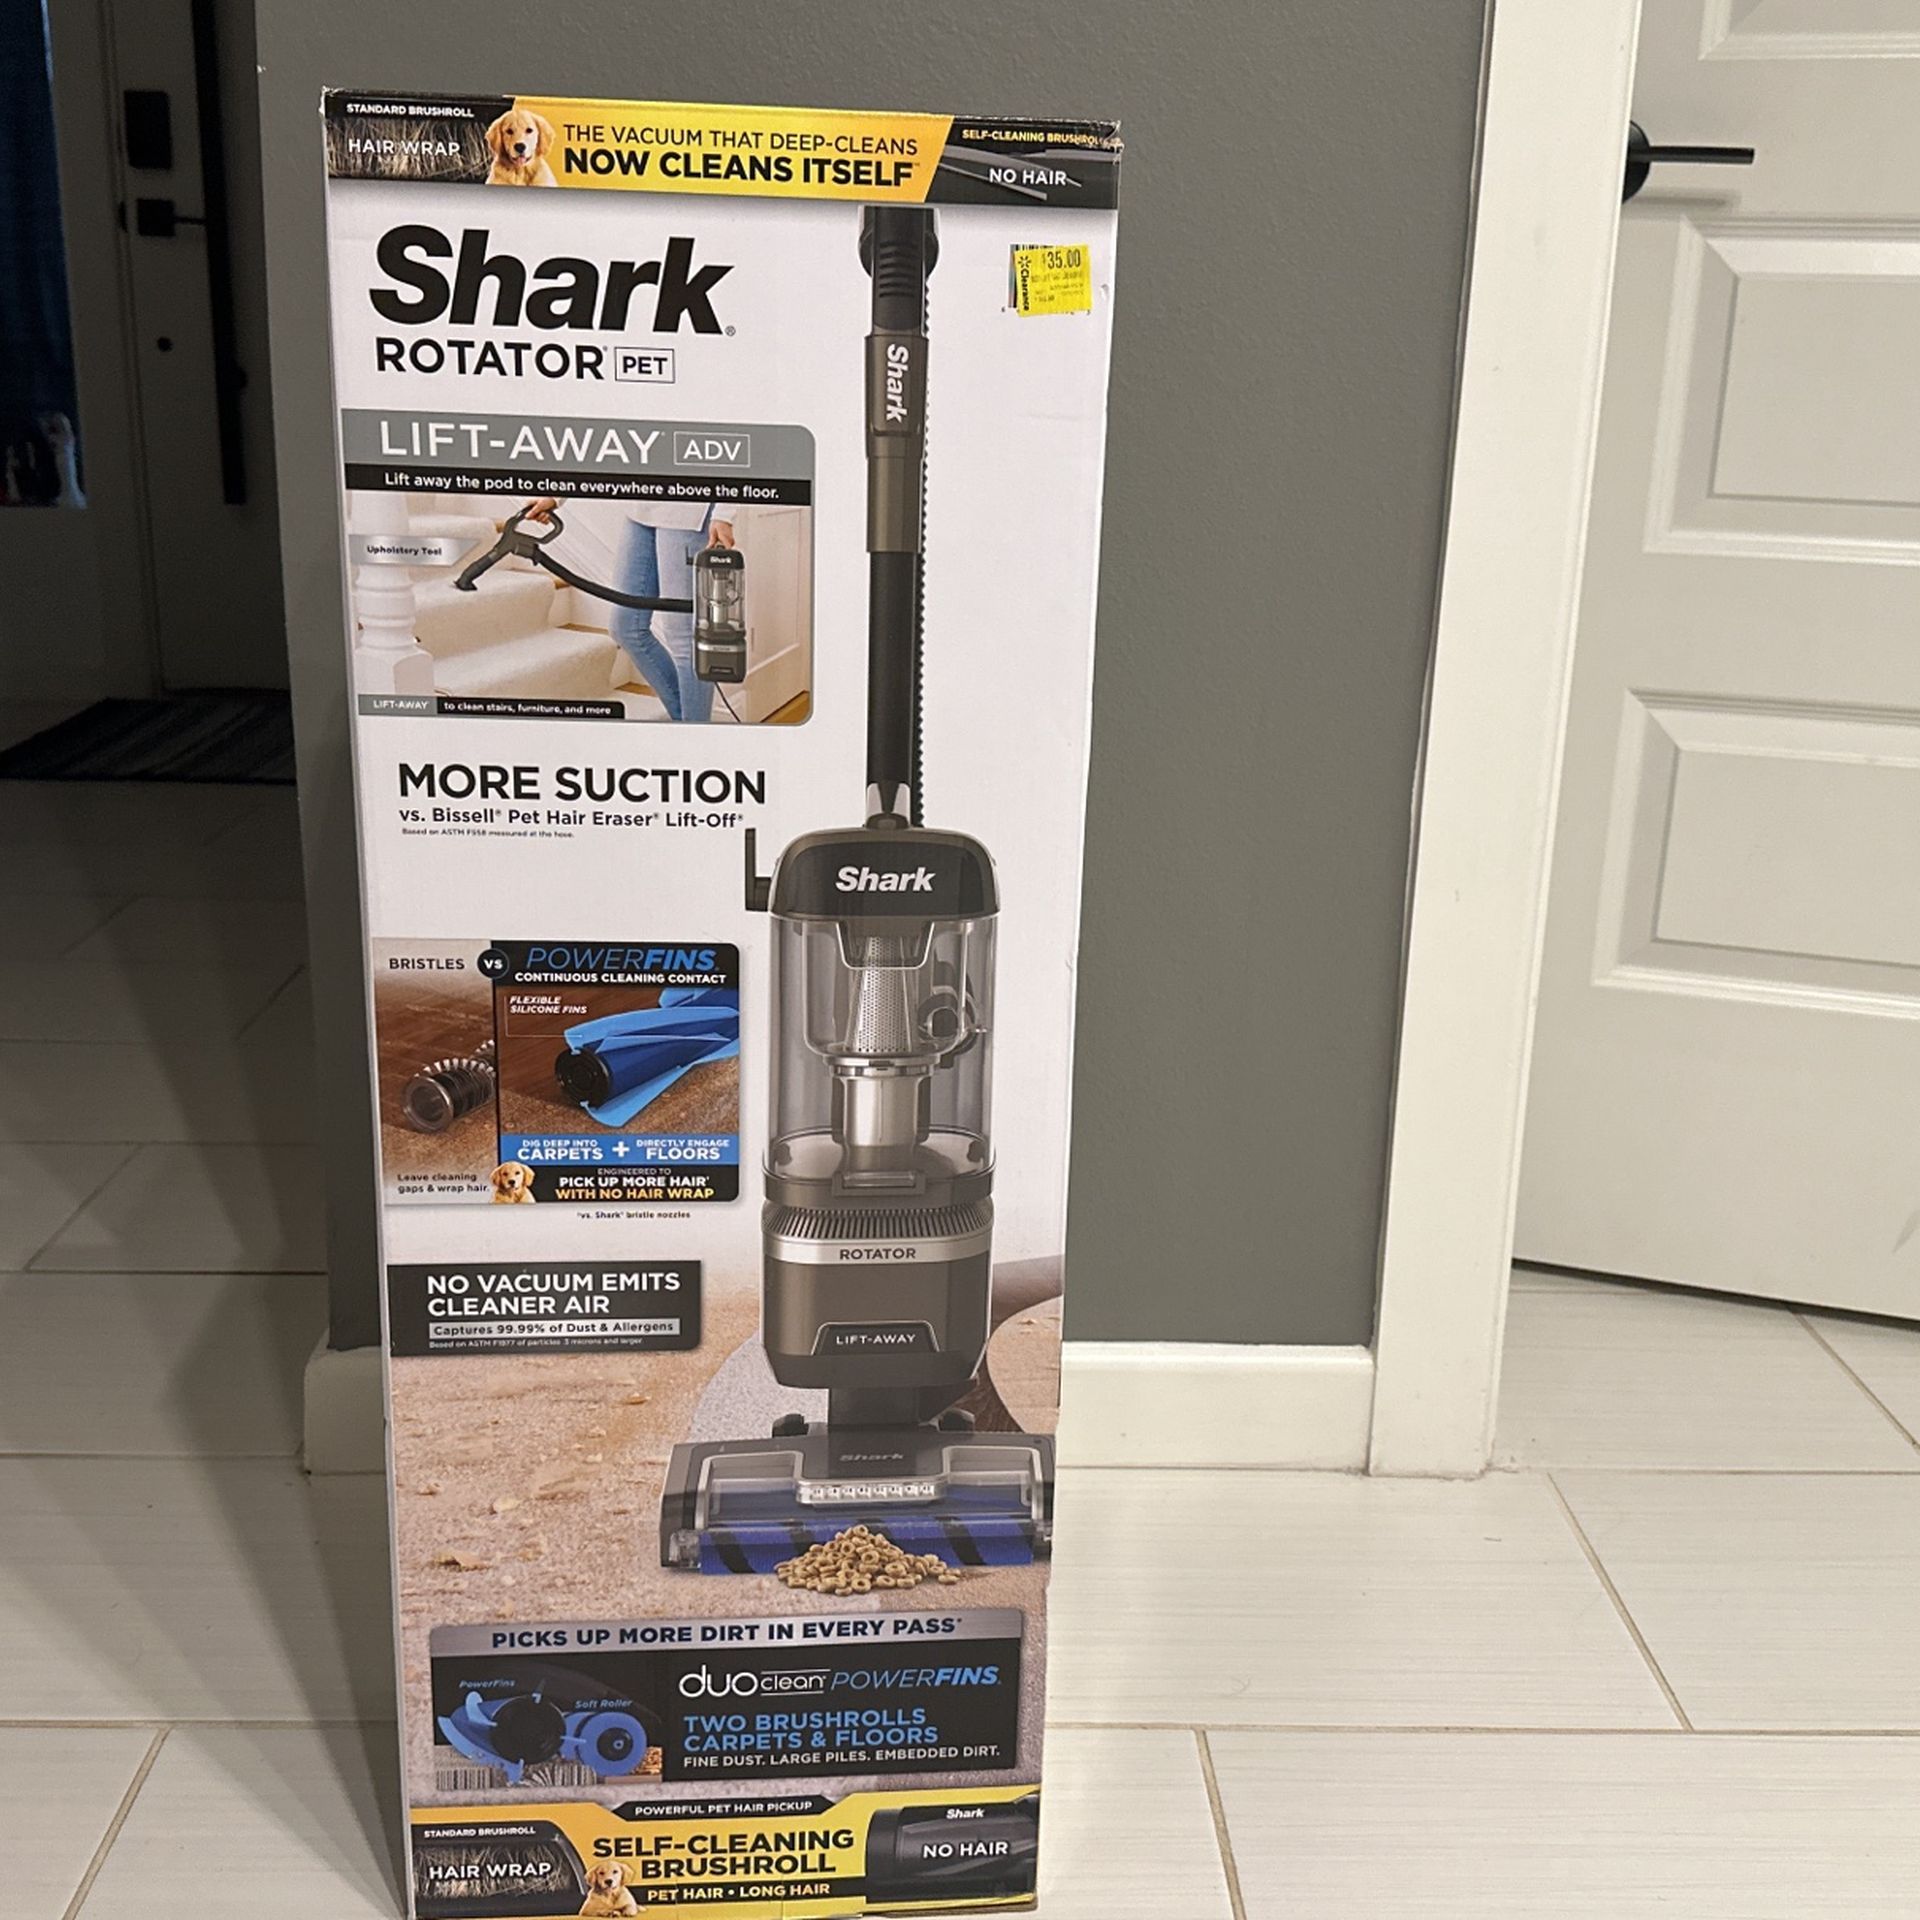 Shark Rotator Lift-Away Upright Vacuum with DuoClean PowerFins and Self-Cleaning Brushroll,